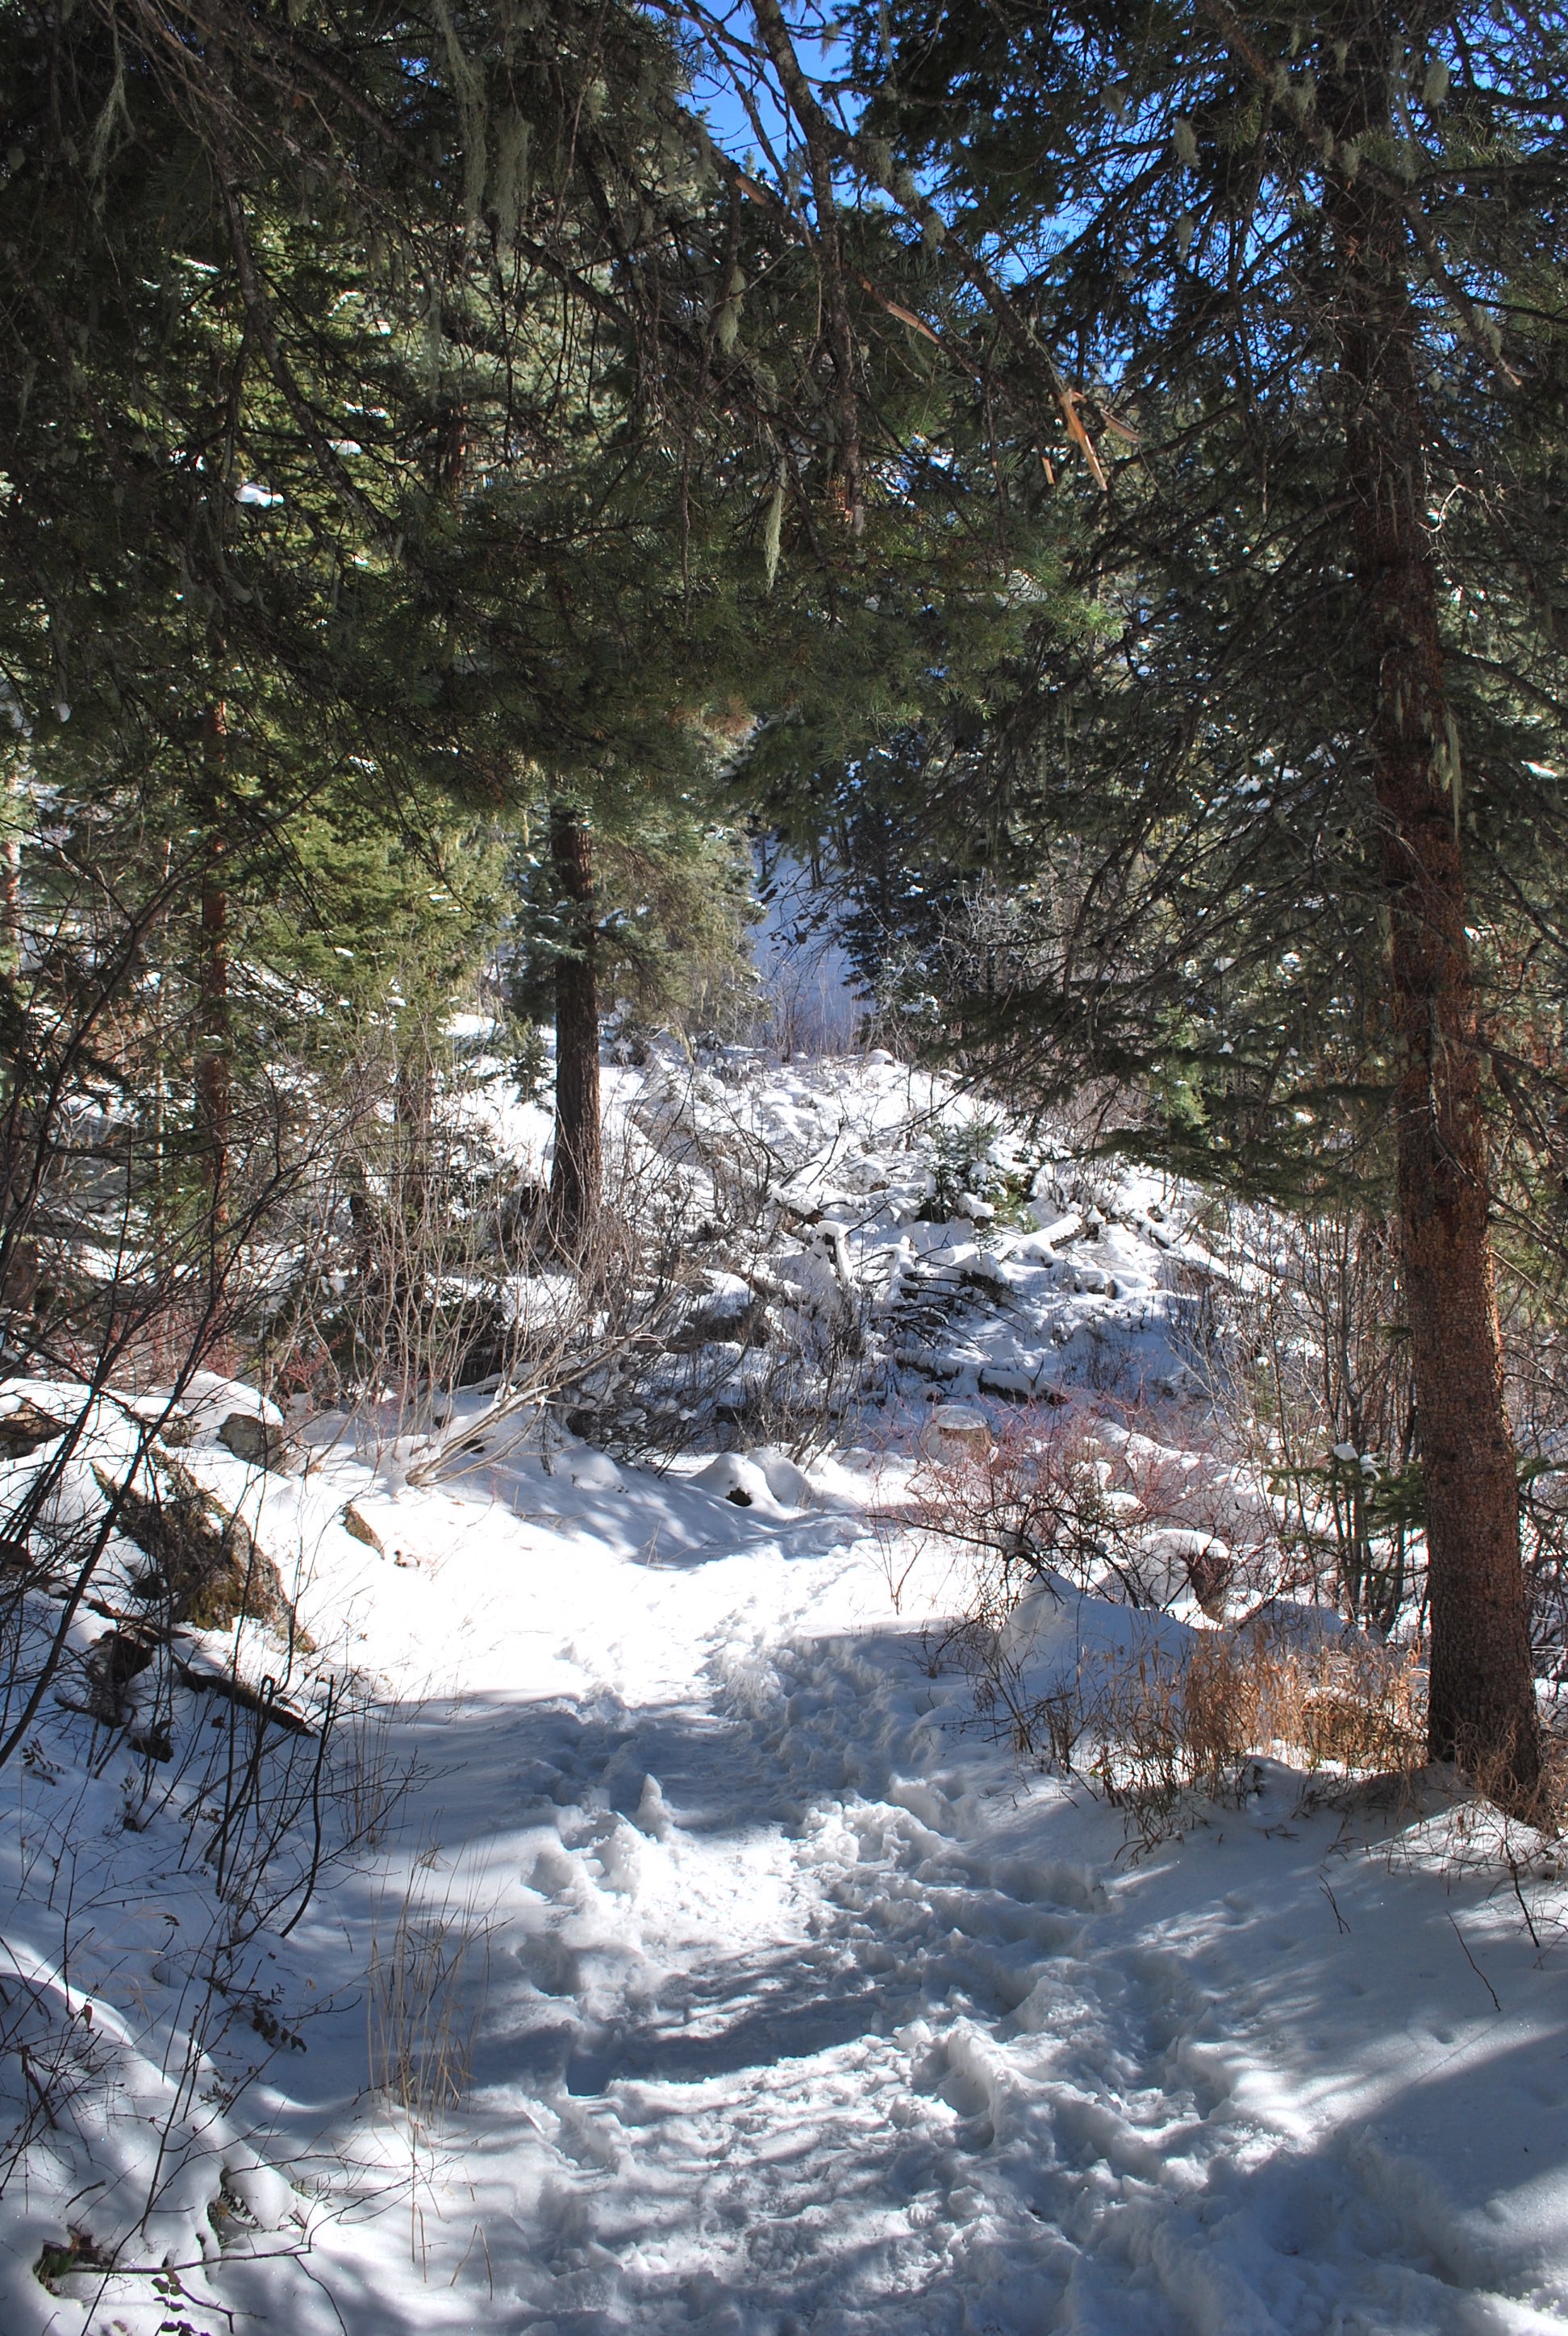 Hiking in Pagosa Springs in the winter